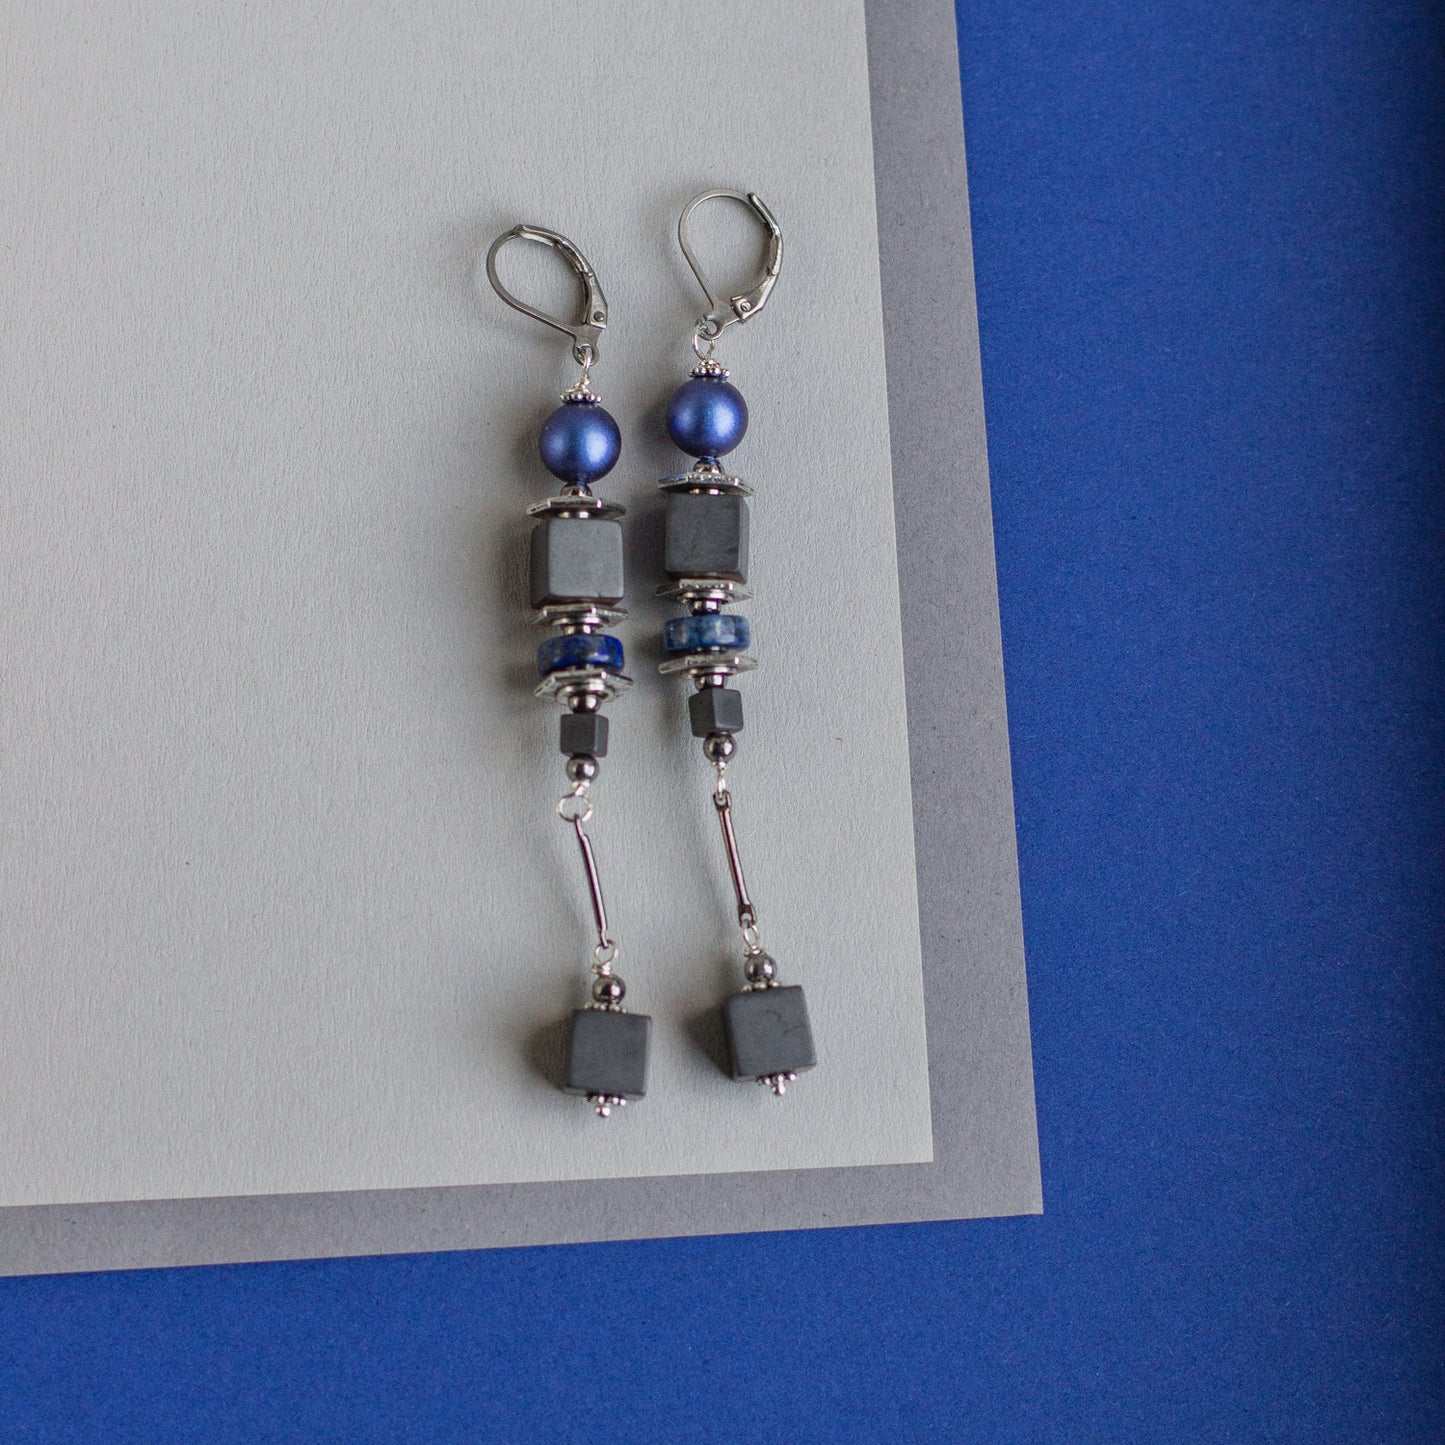 Shop for long royal blue, gray, and silver Swarovski pearl earrings. Dangle drop earrings. Handmade fashion accessories that are unique. Geometric jewelry